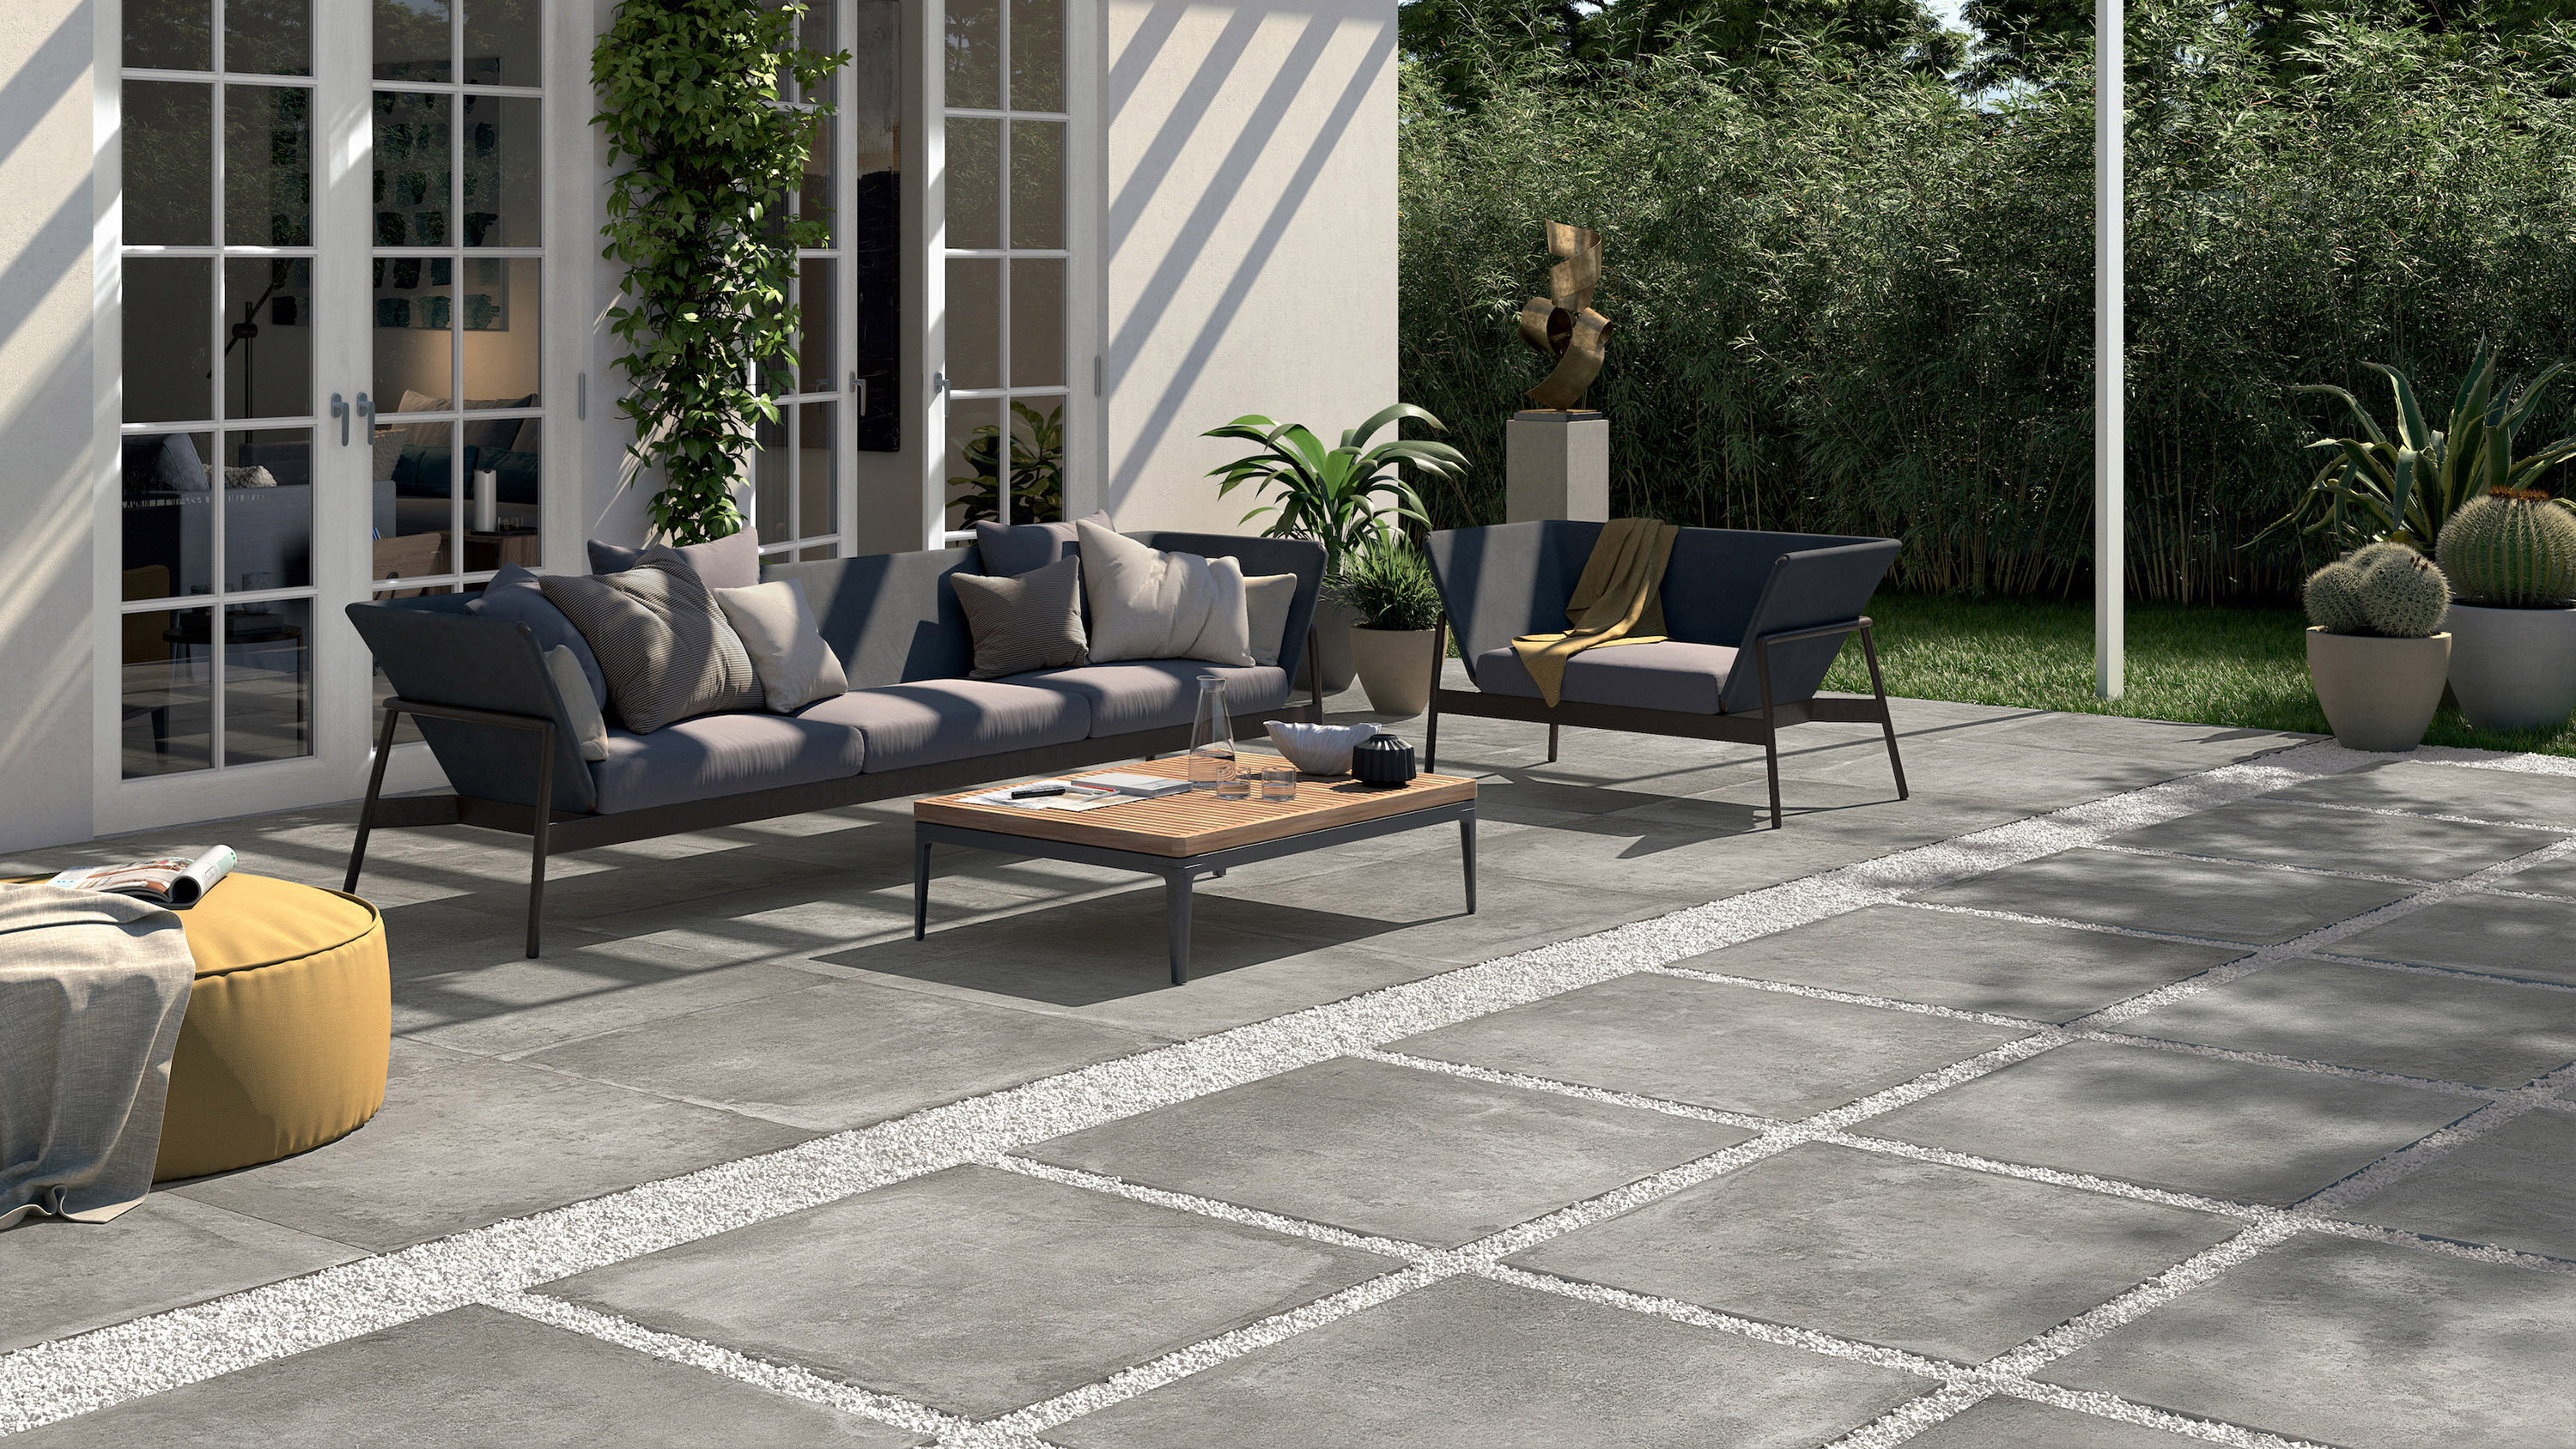 Modern Paving Ideas 13 Ways With Tiles Slabs And Stone For A Contemporary Look Gardeningetc - How Much Does It Cost To Pave A Patio Uk